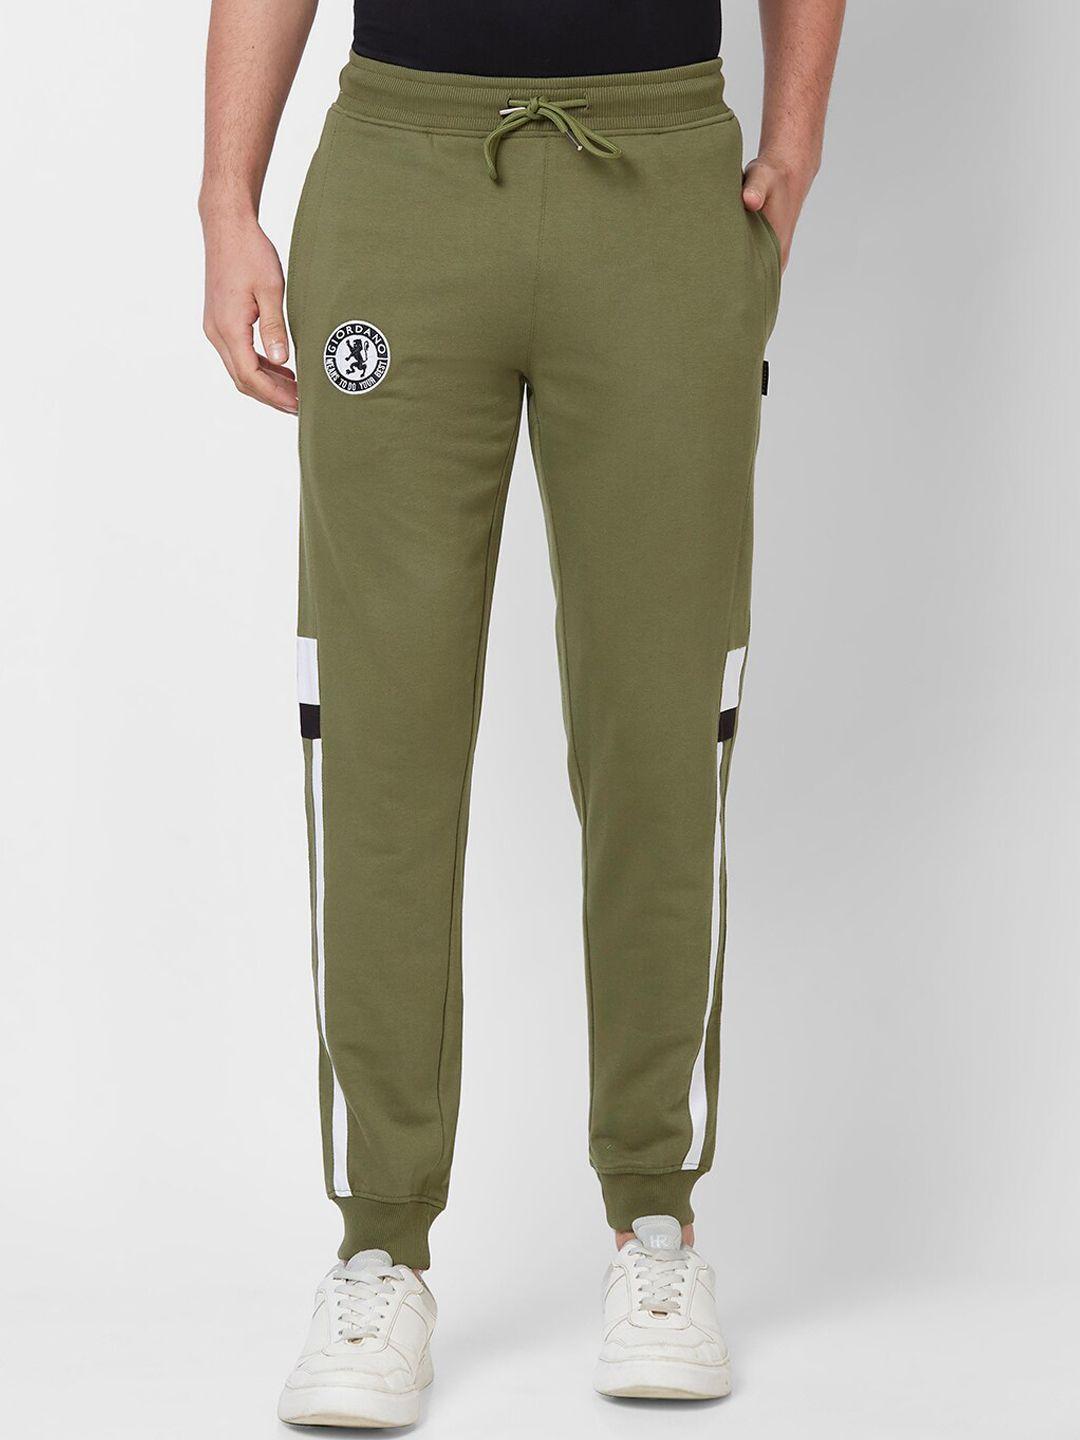 giordano men olive green slim fit joggers trousers